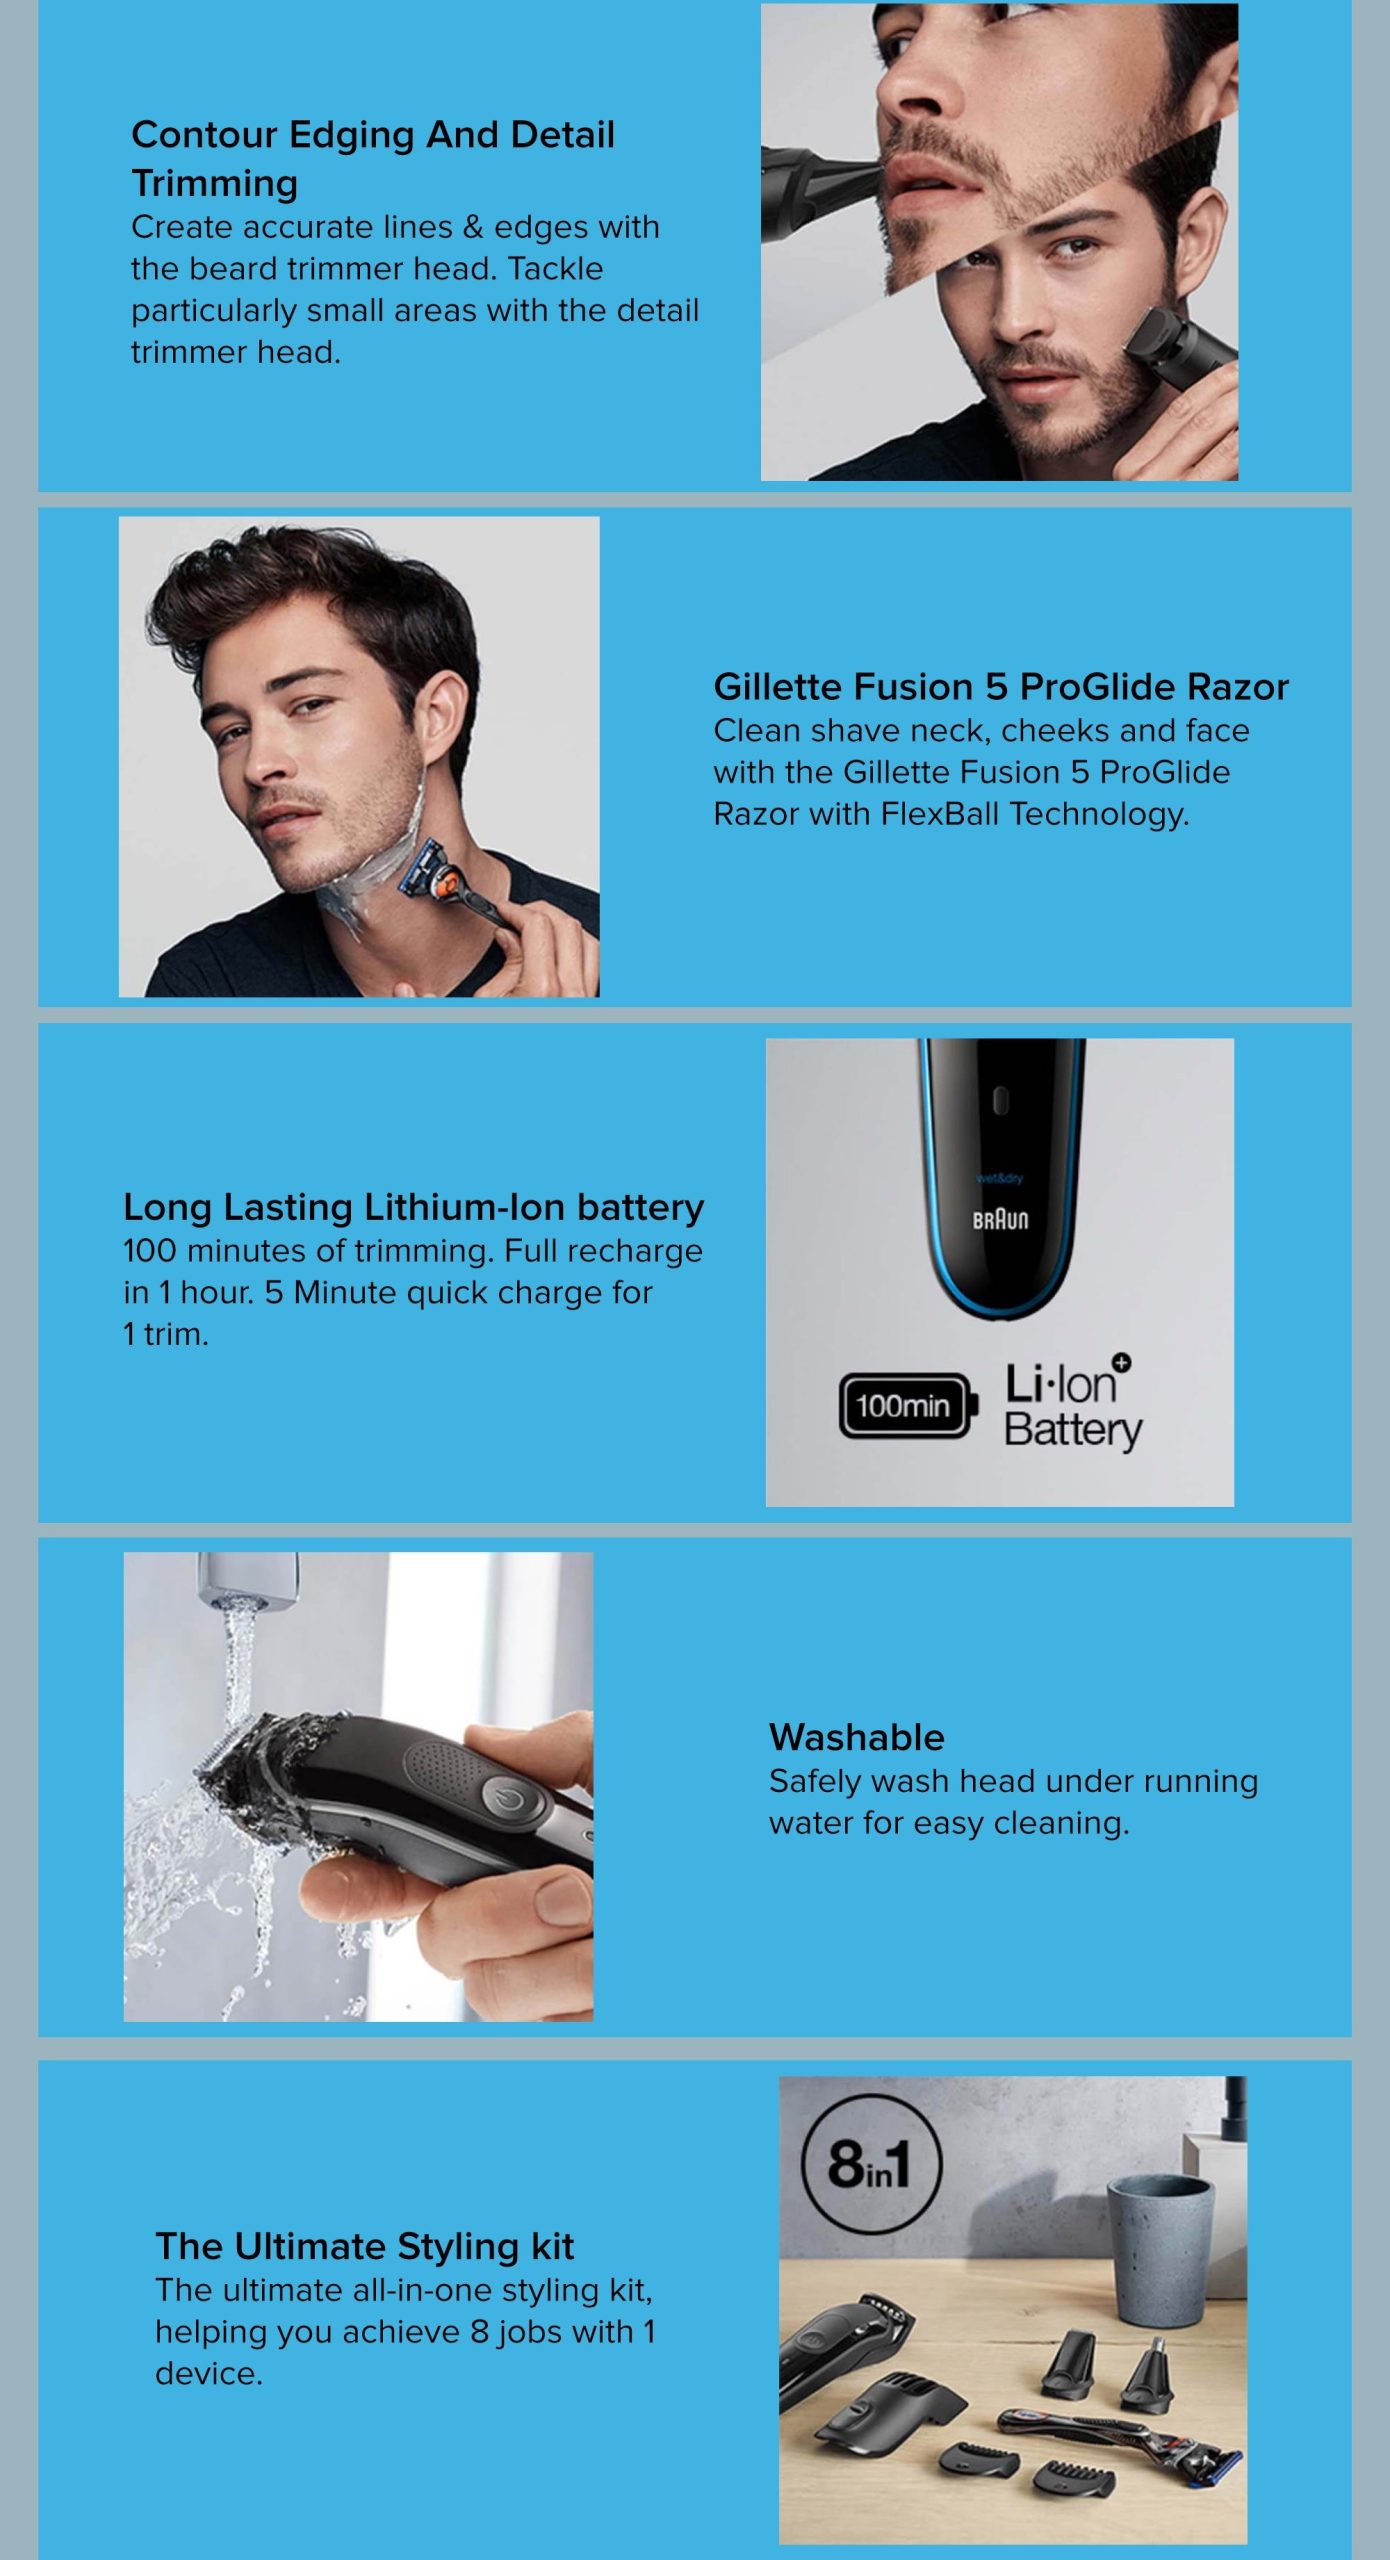 Buy Braun UAE in trimmer MGK5260 for Men | PLUGnPOINT